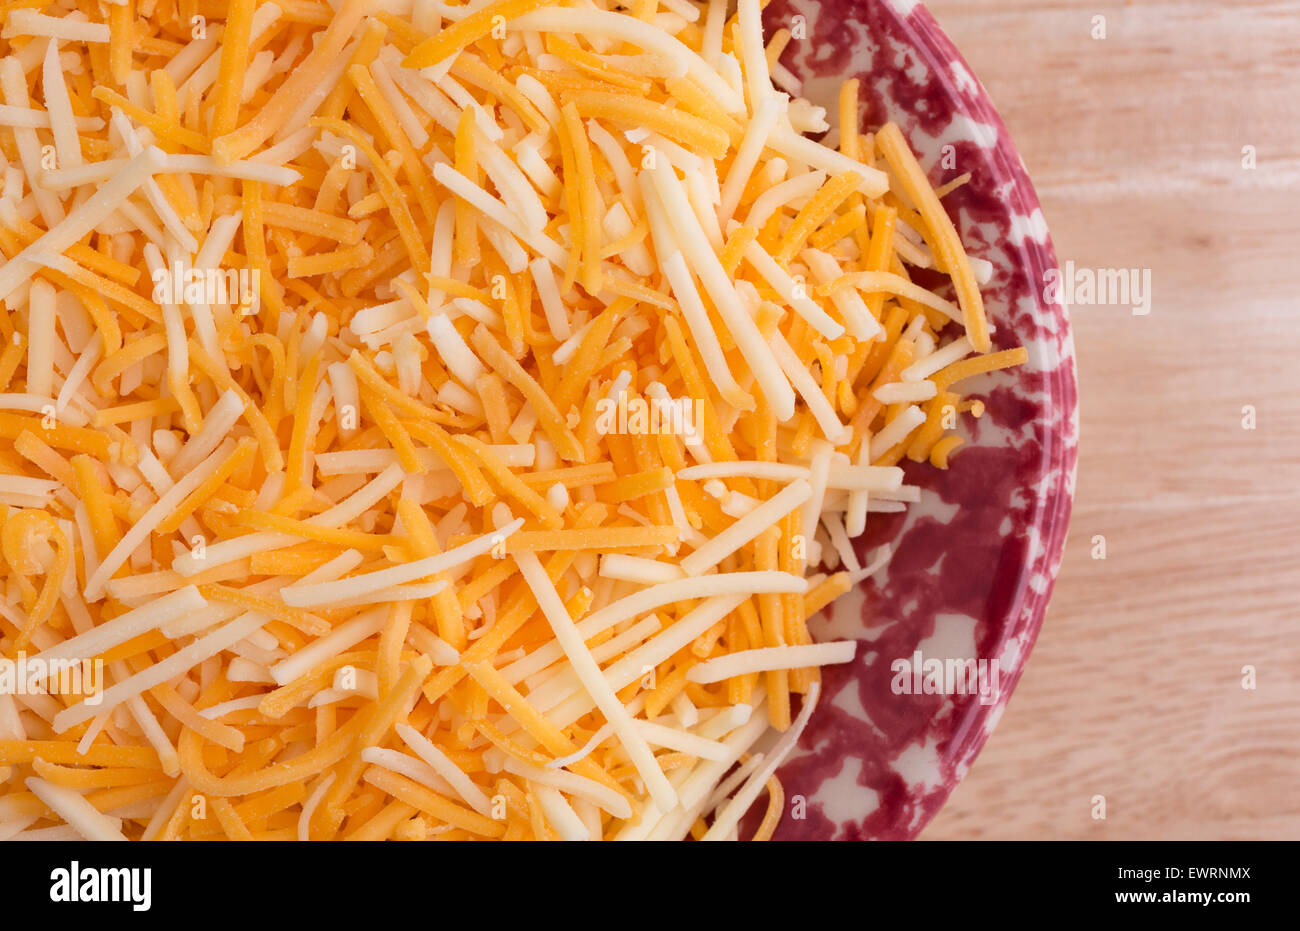 Top close view of a small colorful tray filled with shredded white cheddar, sharp cheddar and mild cheddar cheeses atop a wood t Stock Photo